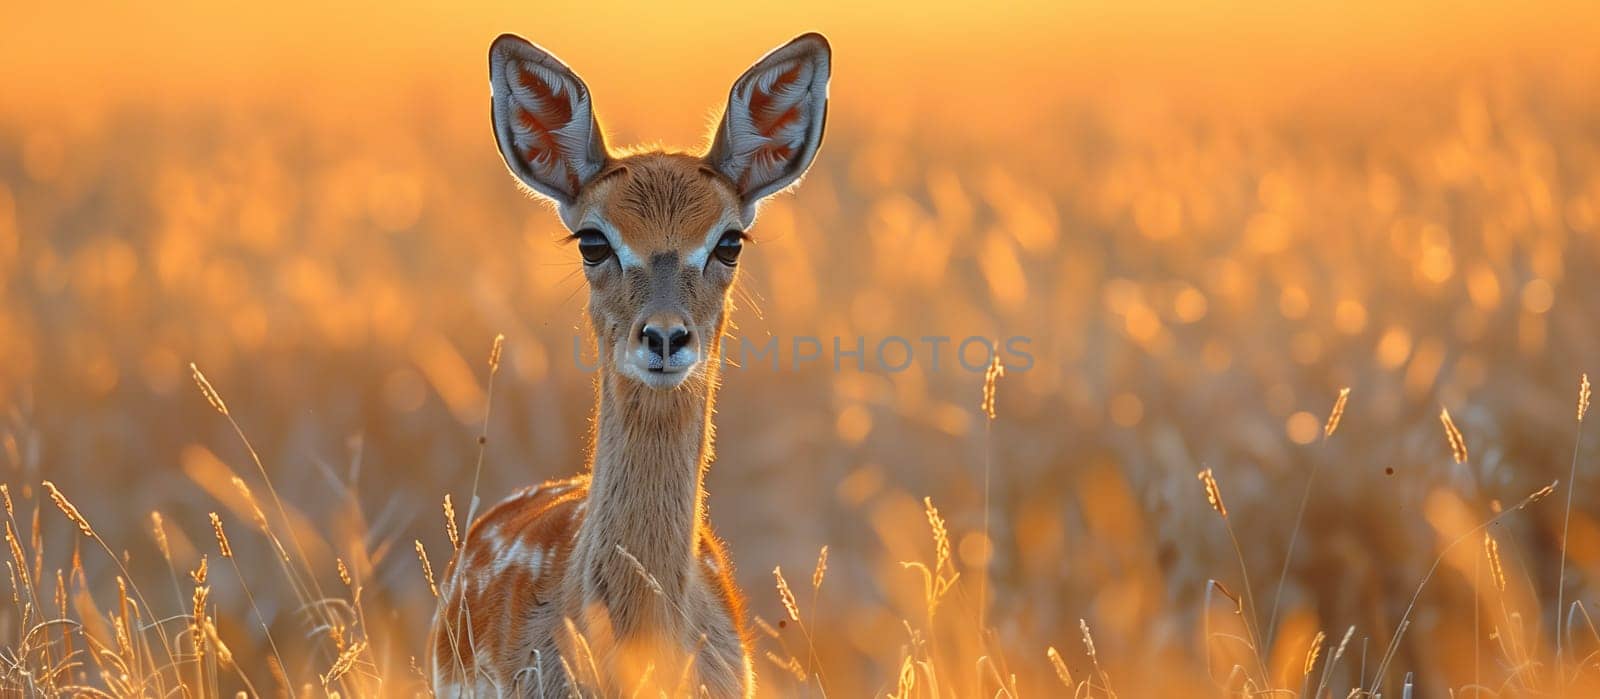 A deer with fur blending into the grassland stands in a prairie, its snout raised towards the camera in a natural landscape